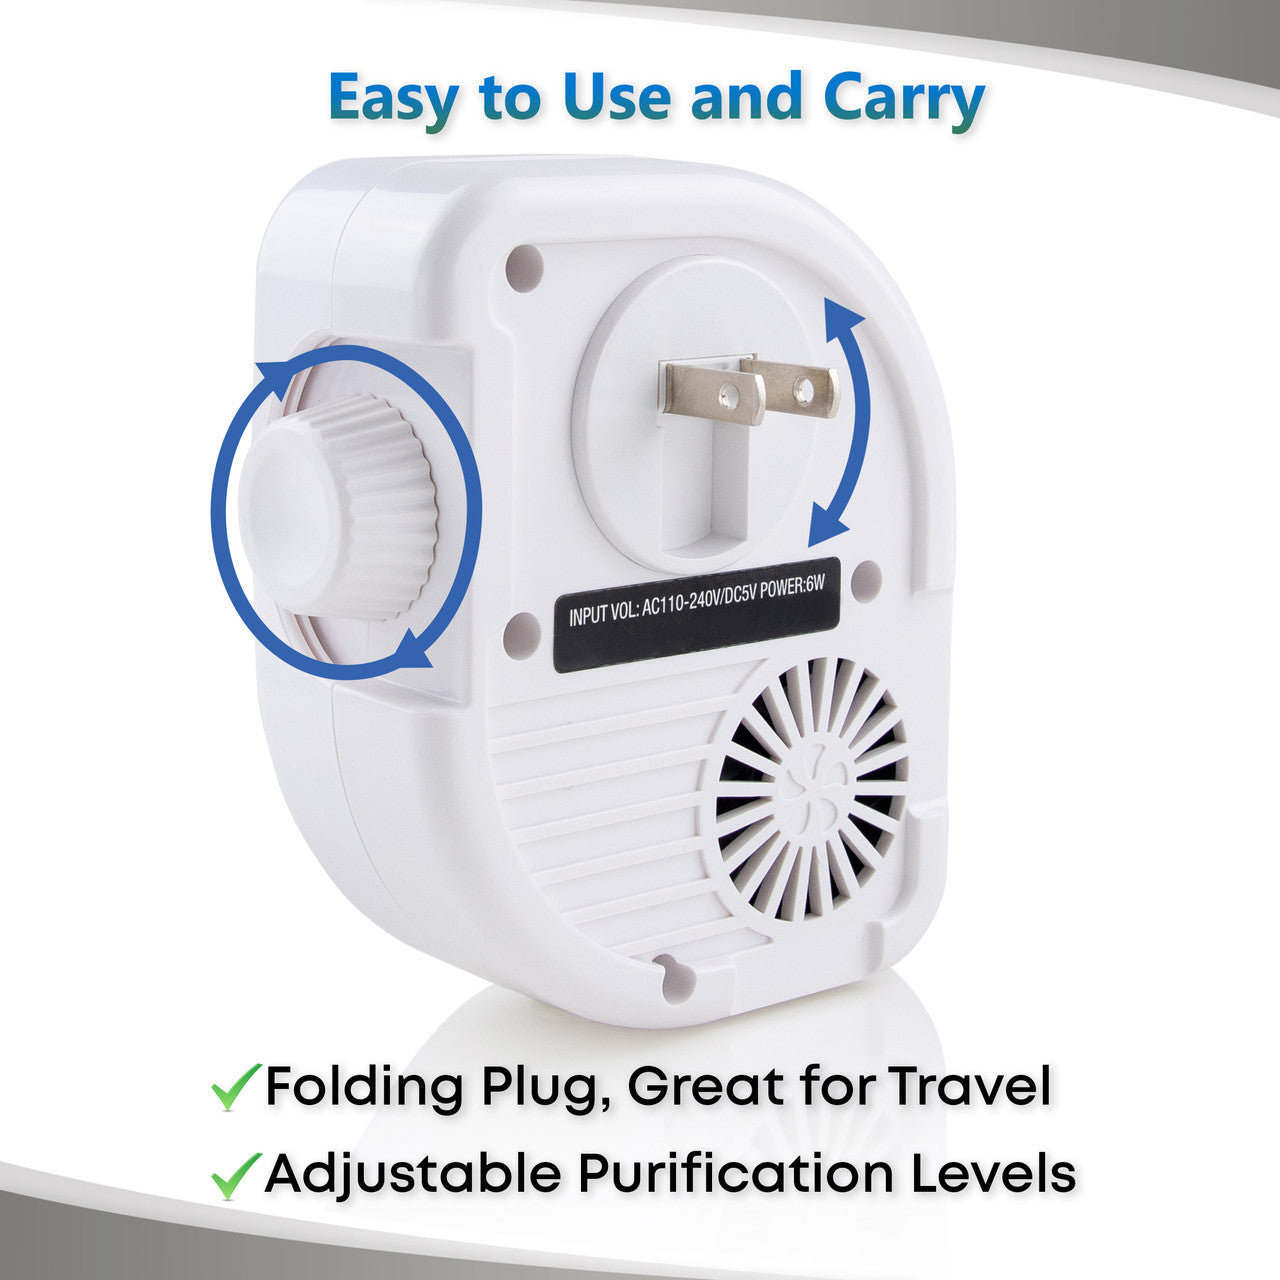 A collapsible plug makes our air purifier portable. 